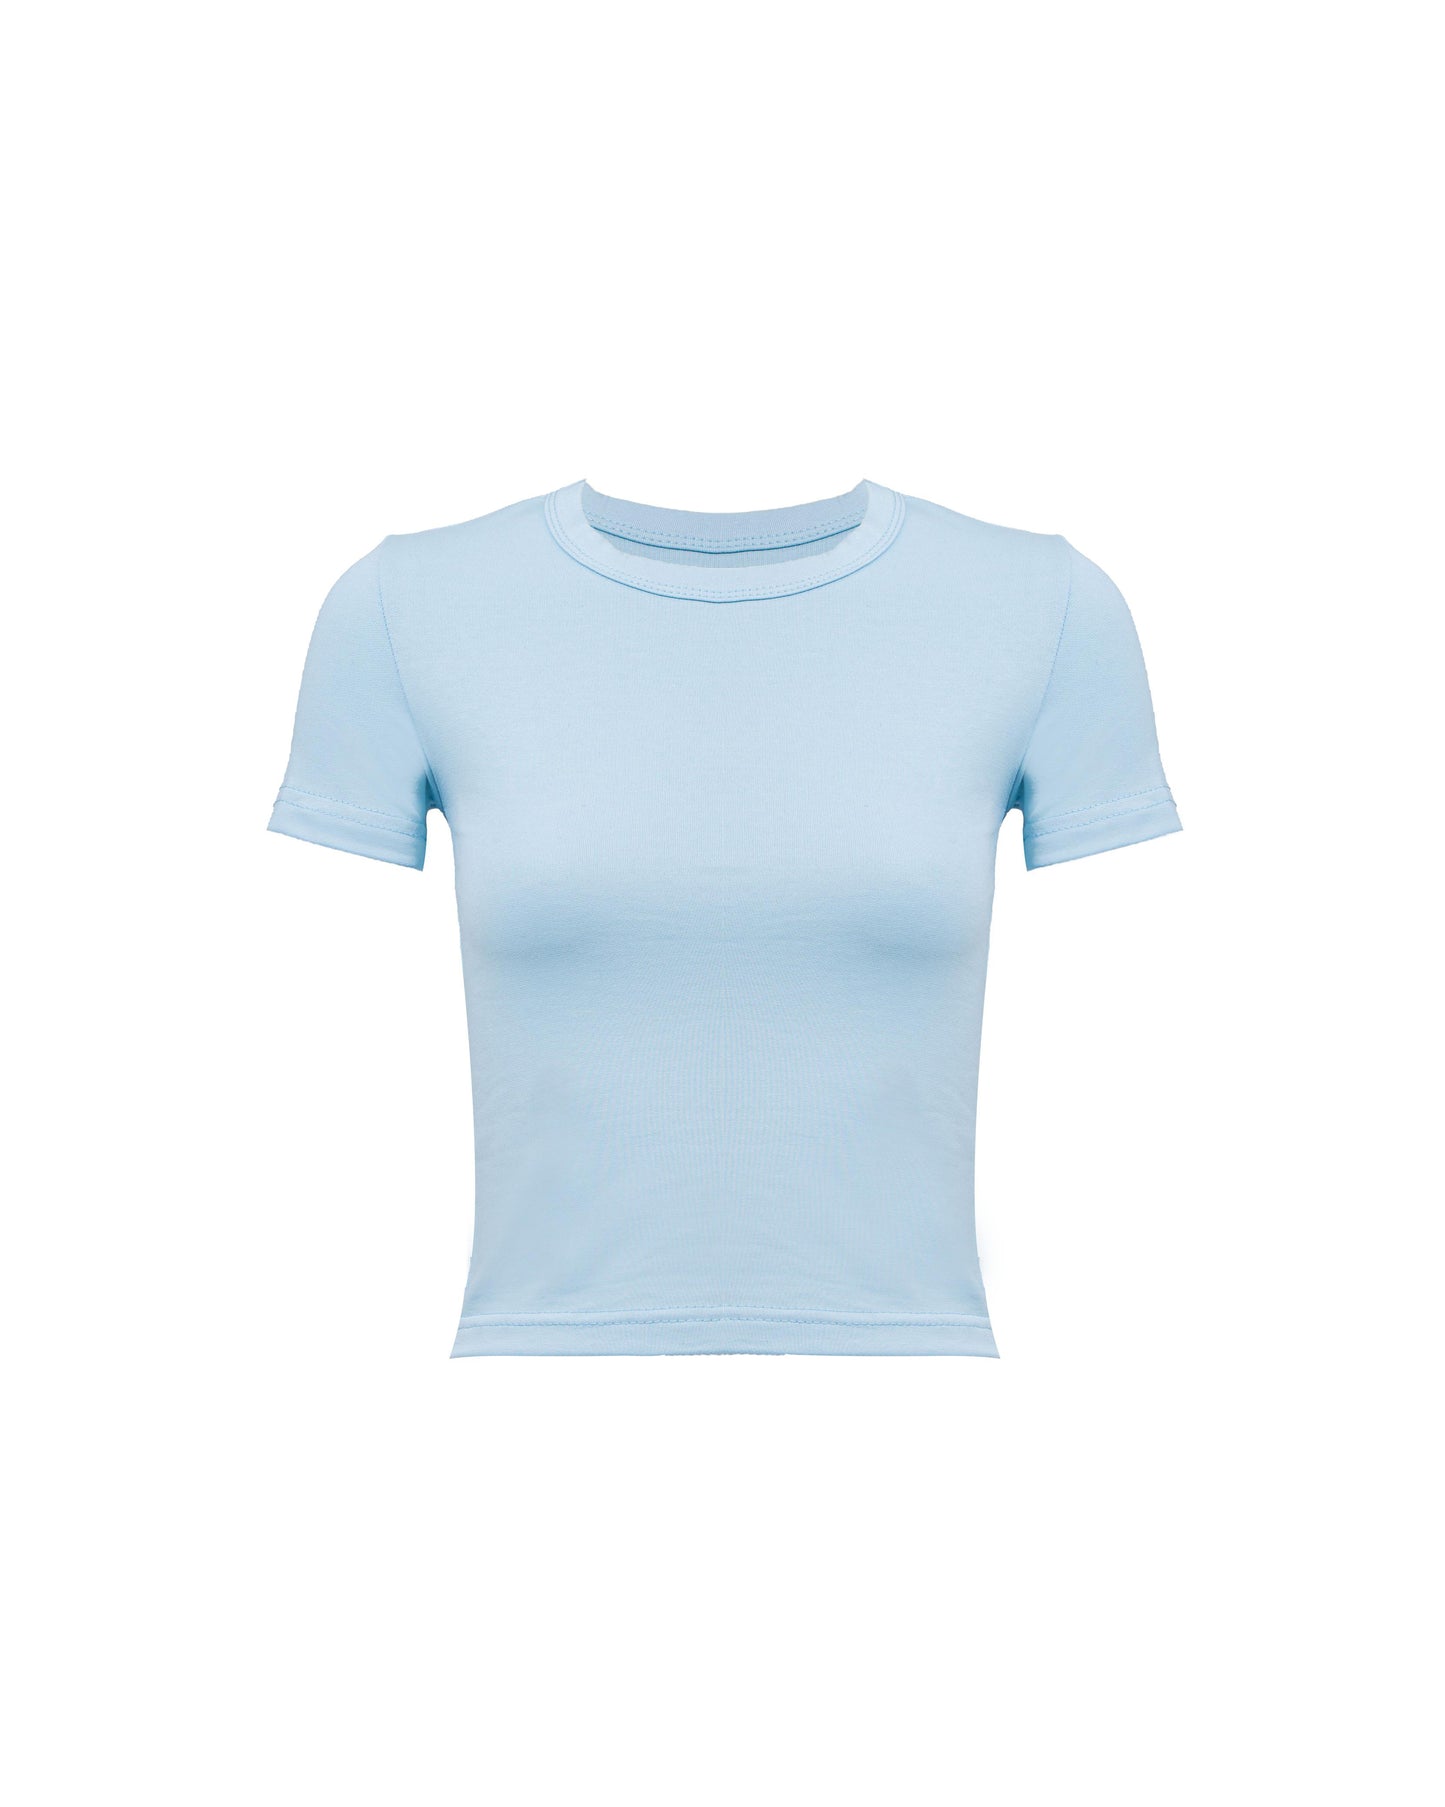 BABY BLUE COTTON - SHORT SLEEVES TOP